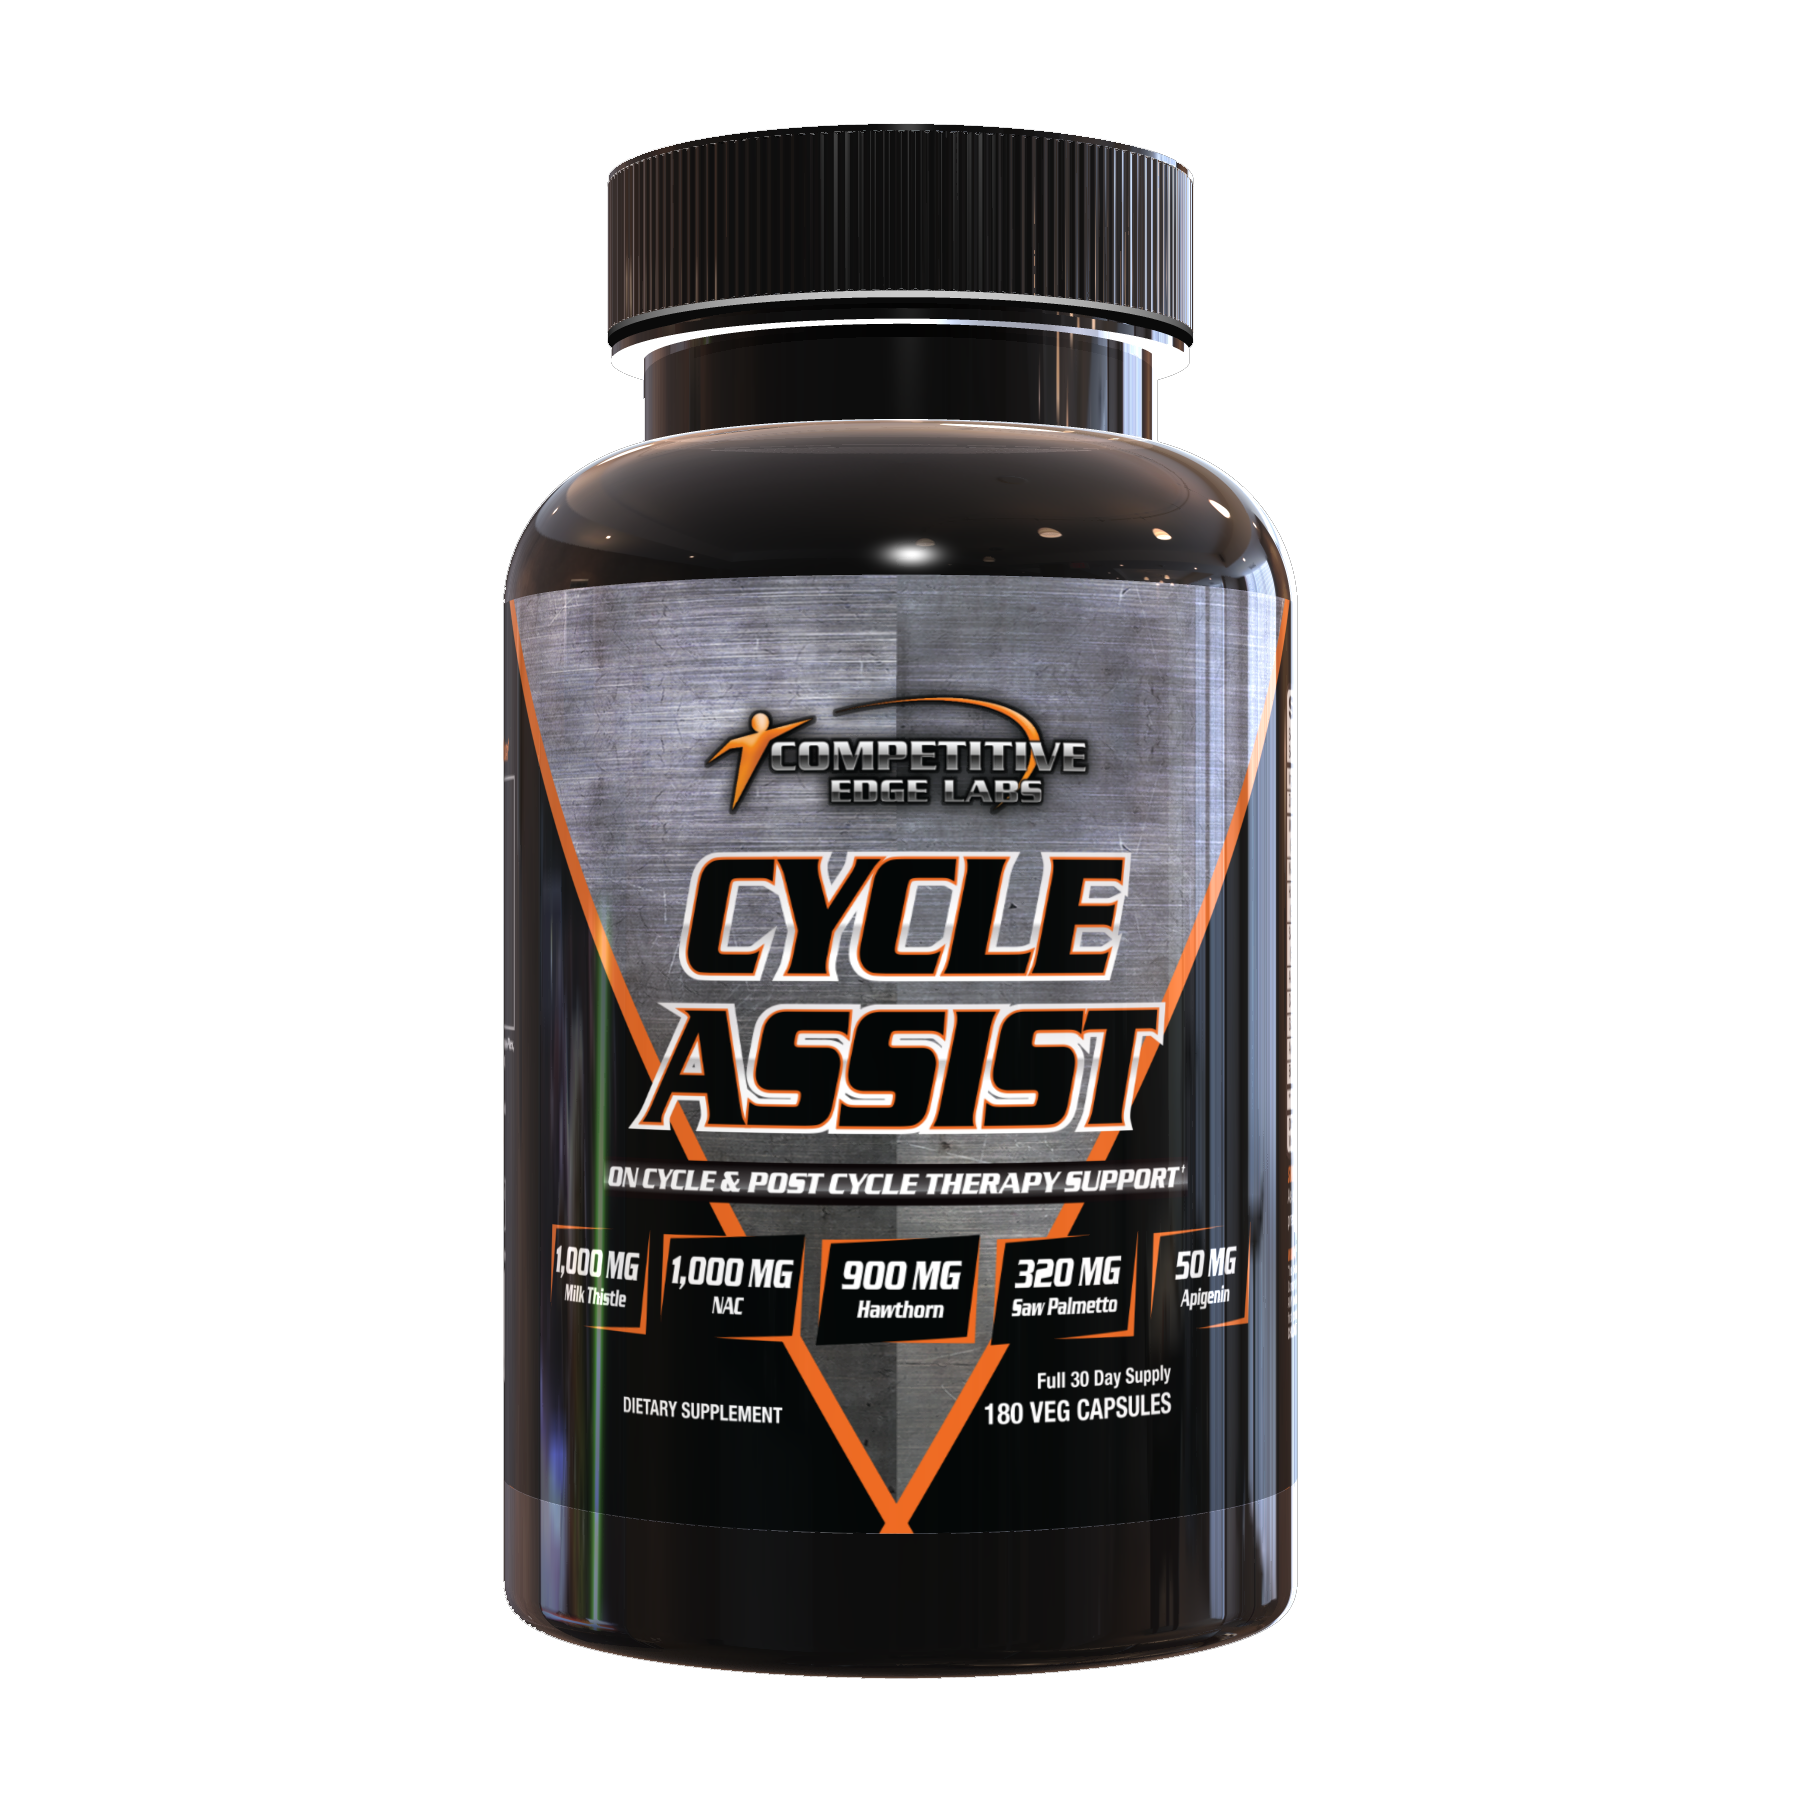 Competitive Edge Labs Cycle Assist - A1 Supplements Store